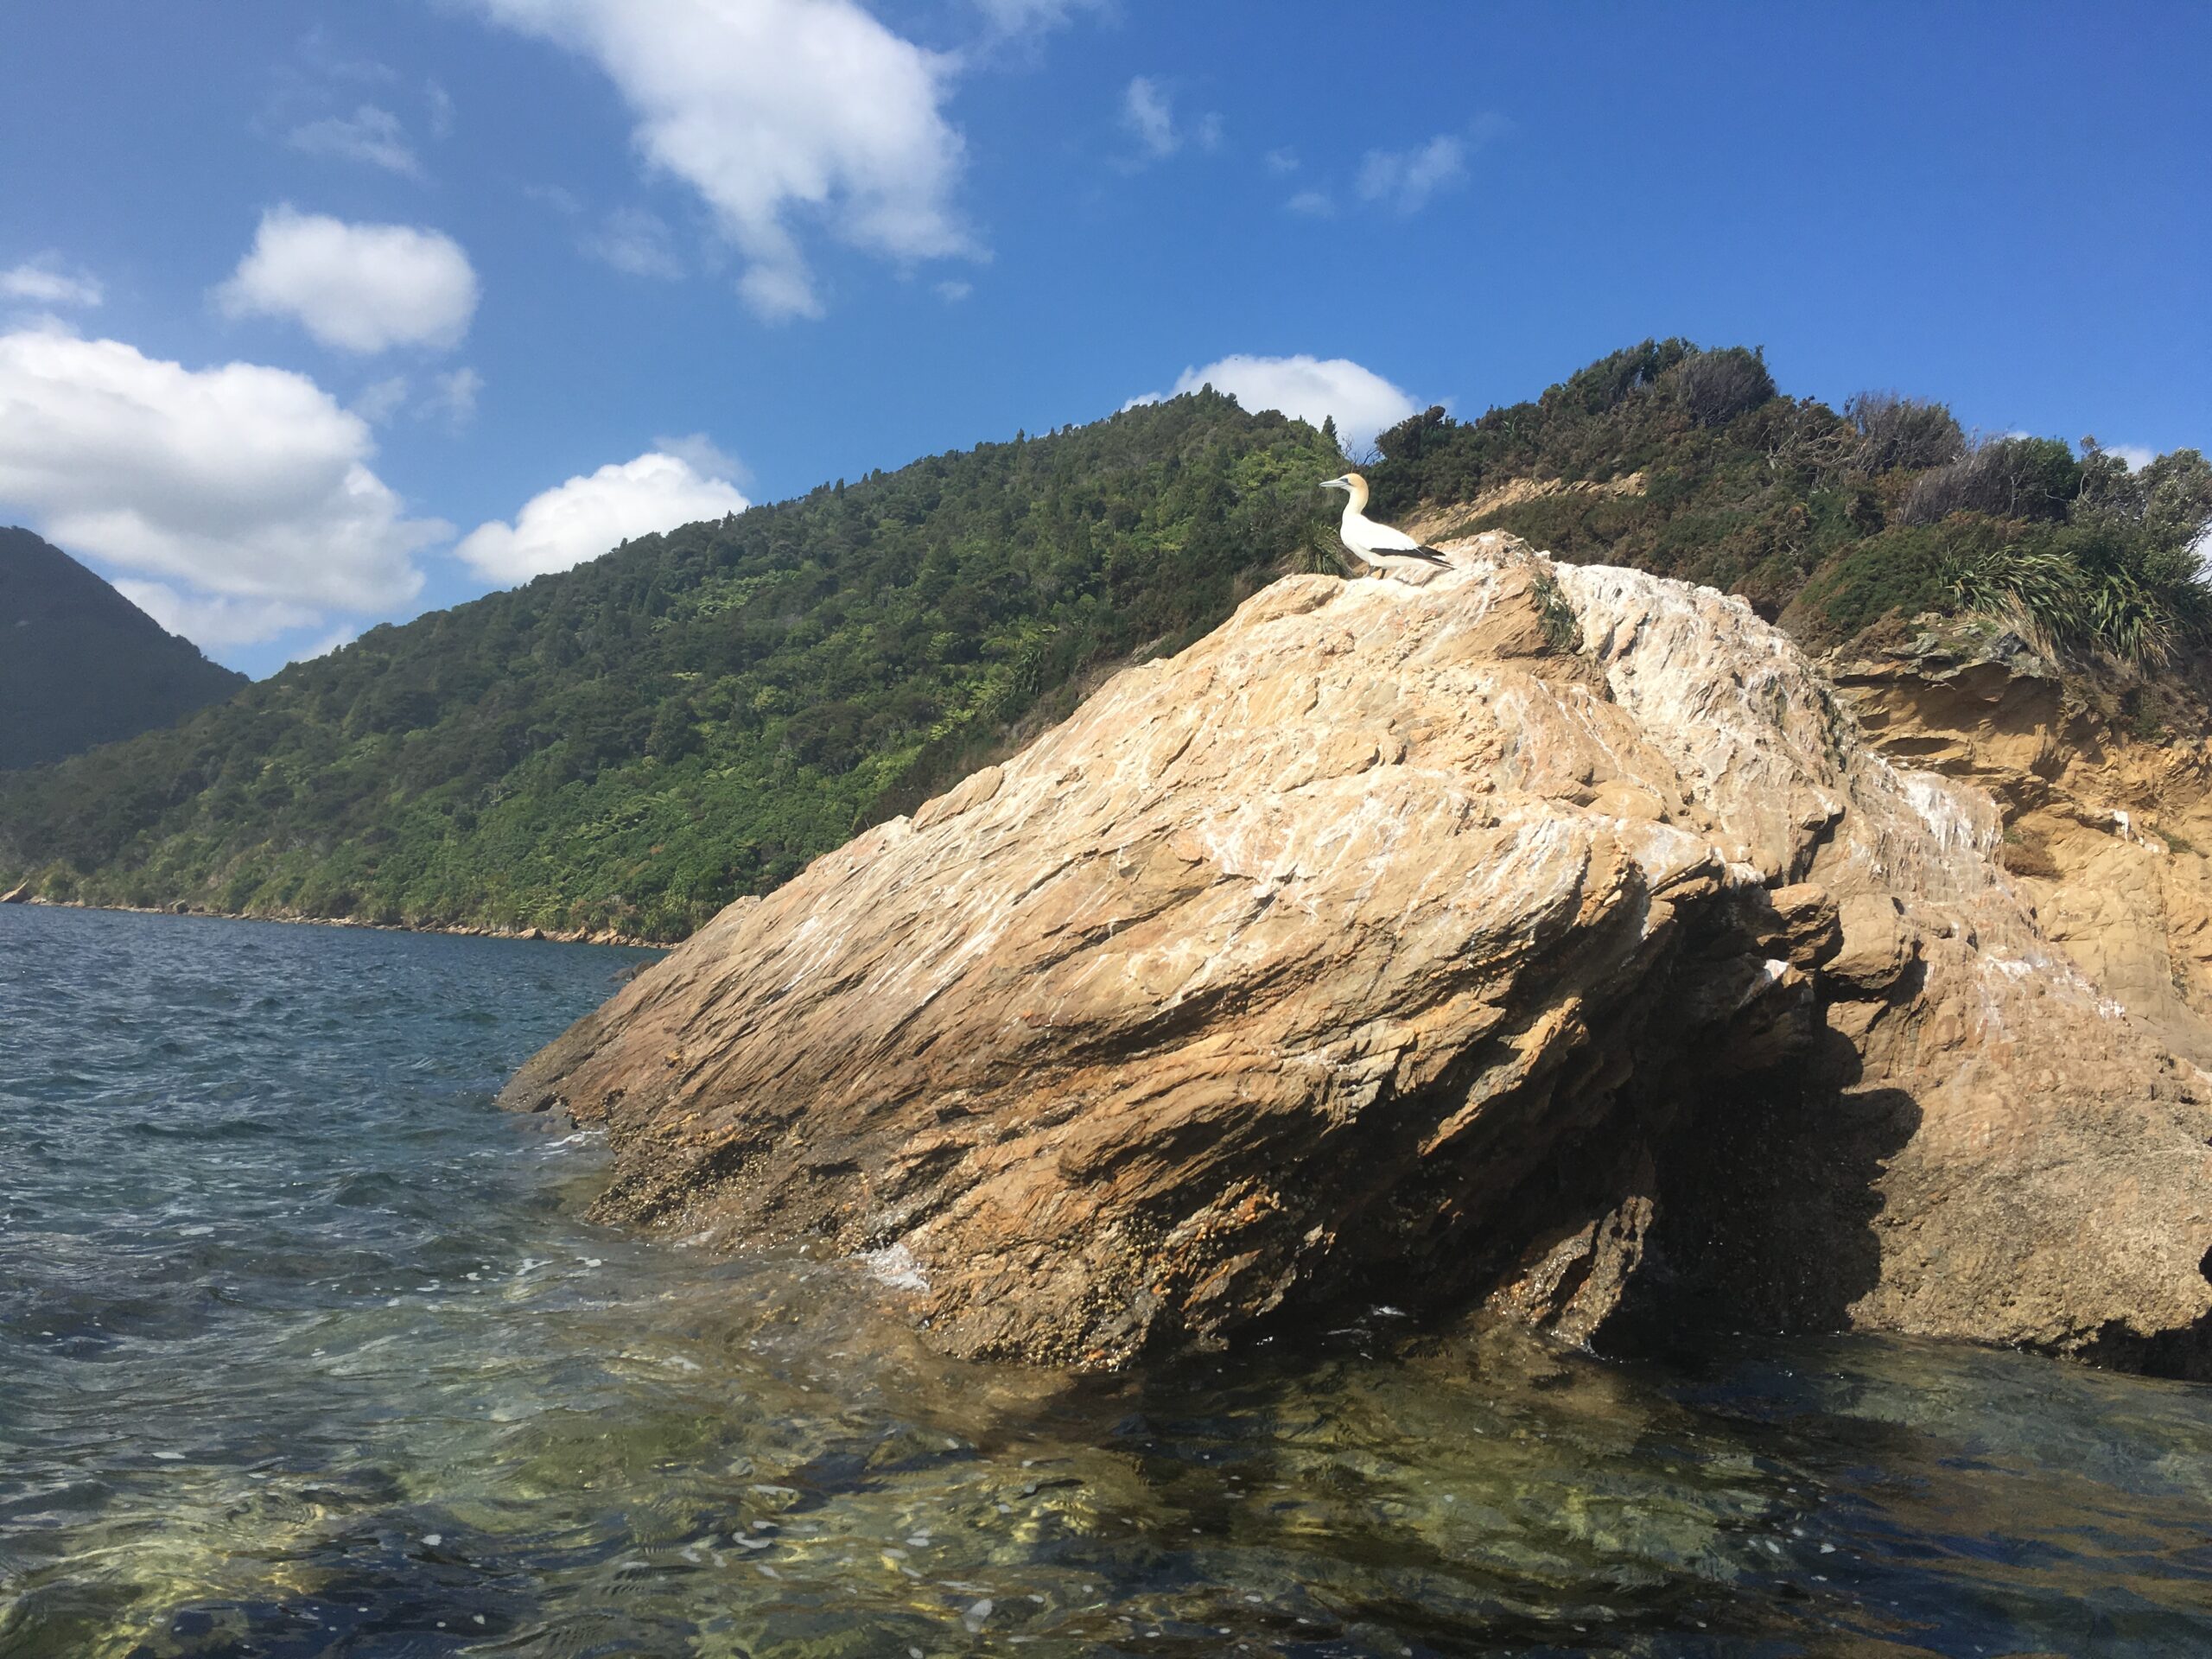 A spotted shag (bird) sits on a rock in Queen Charlotte Sound, New Zealand.